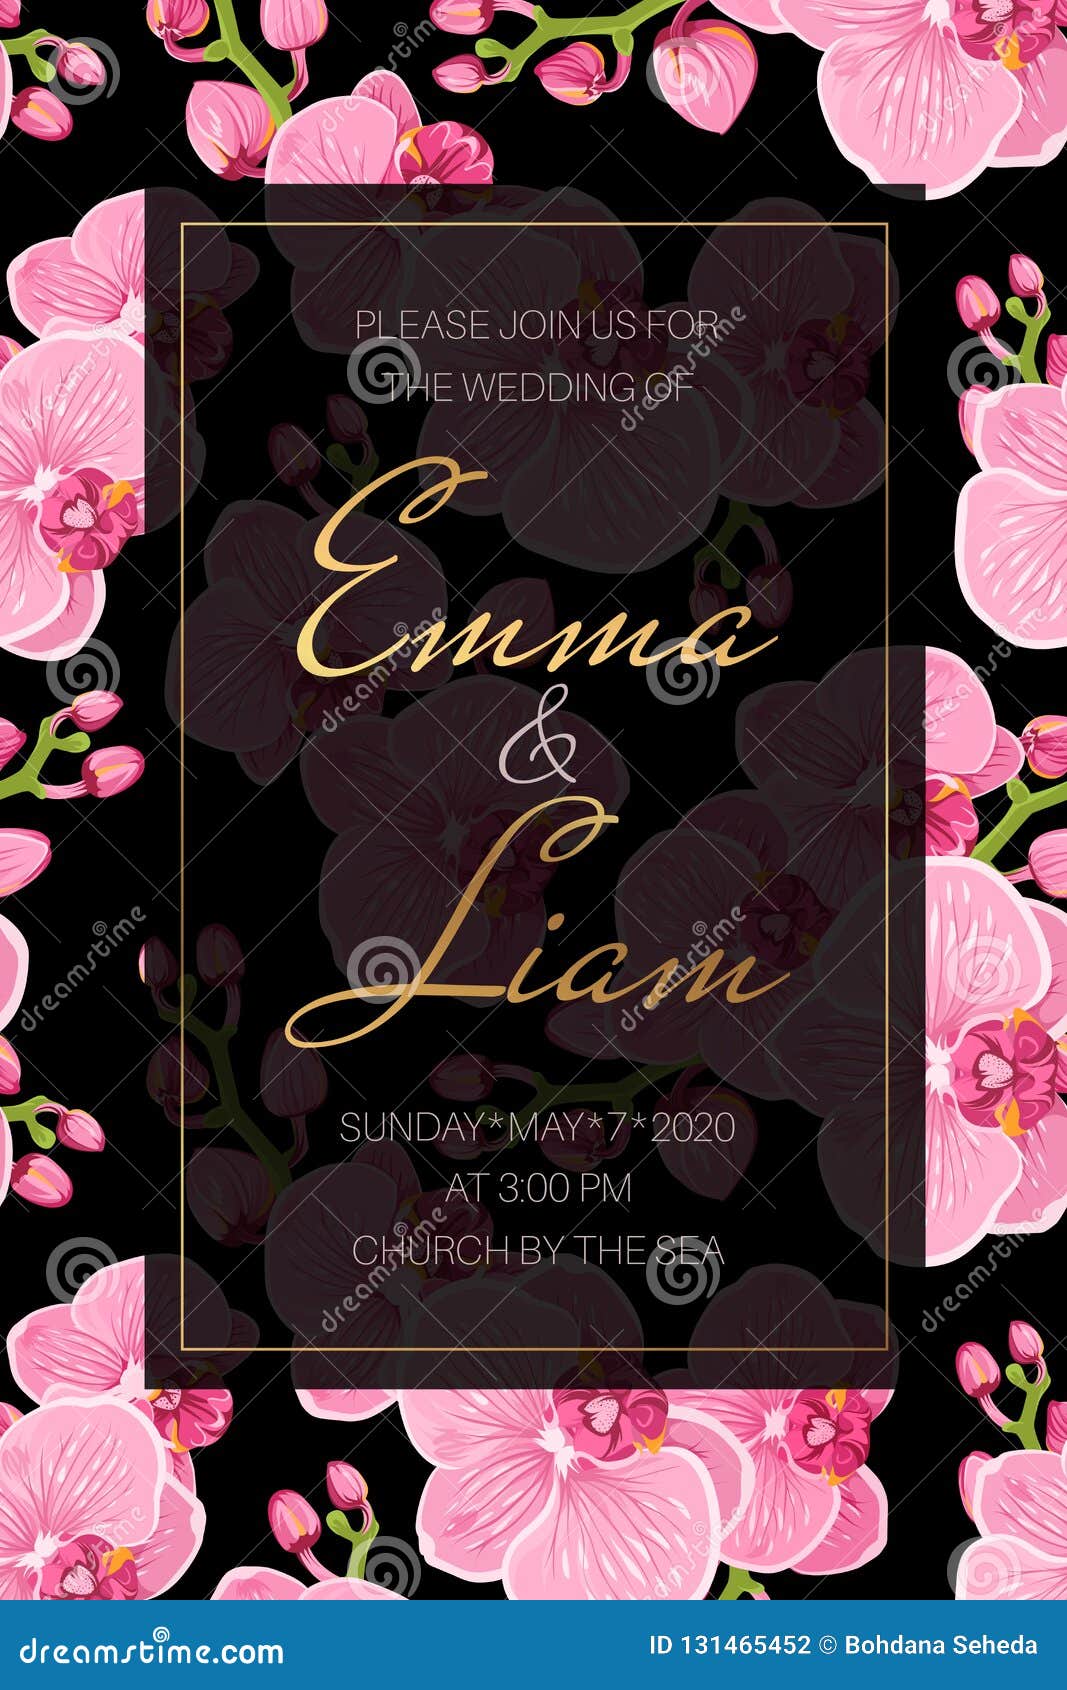 Wedding Event Invitation Card Template. Pink Purple Exotic Orchid Pertaining To Event Invitation Card Template